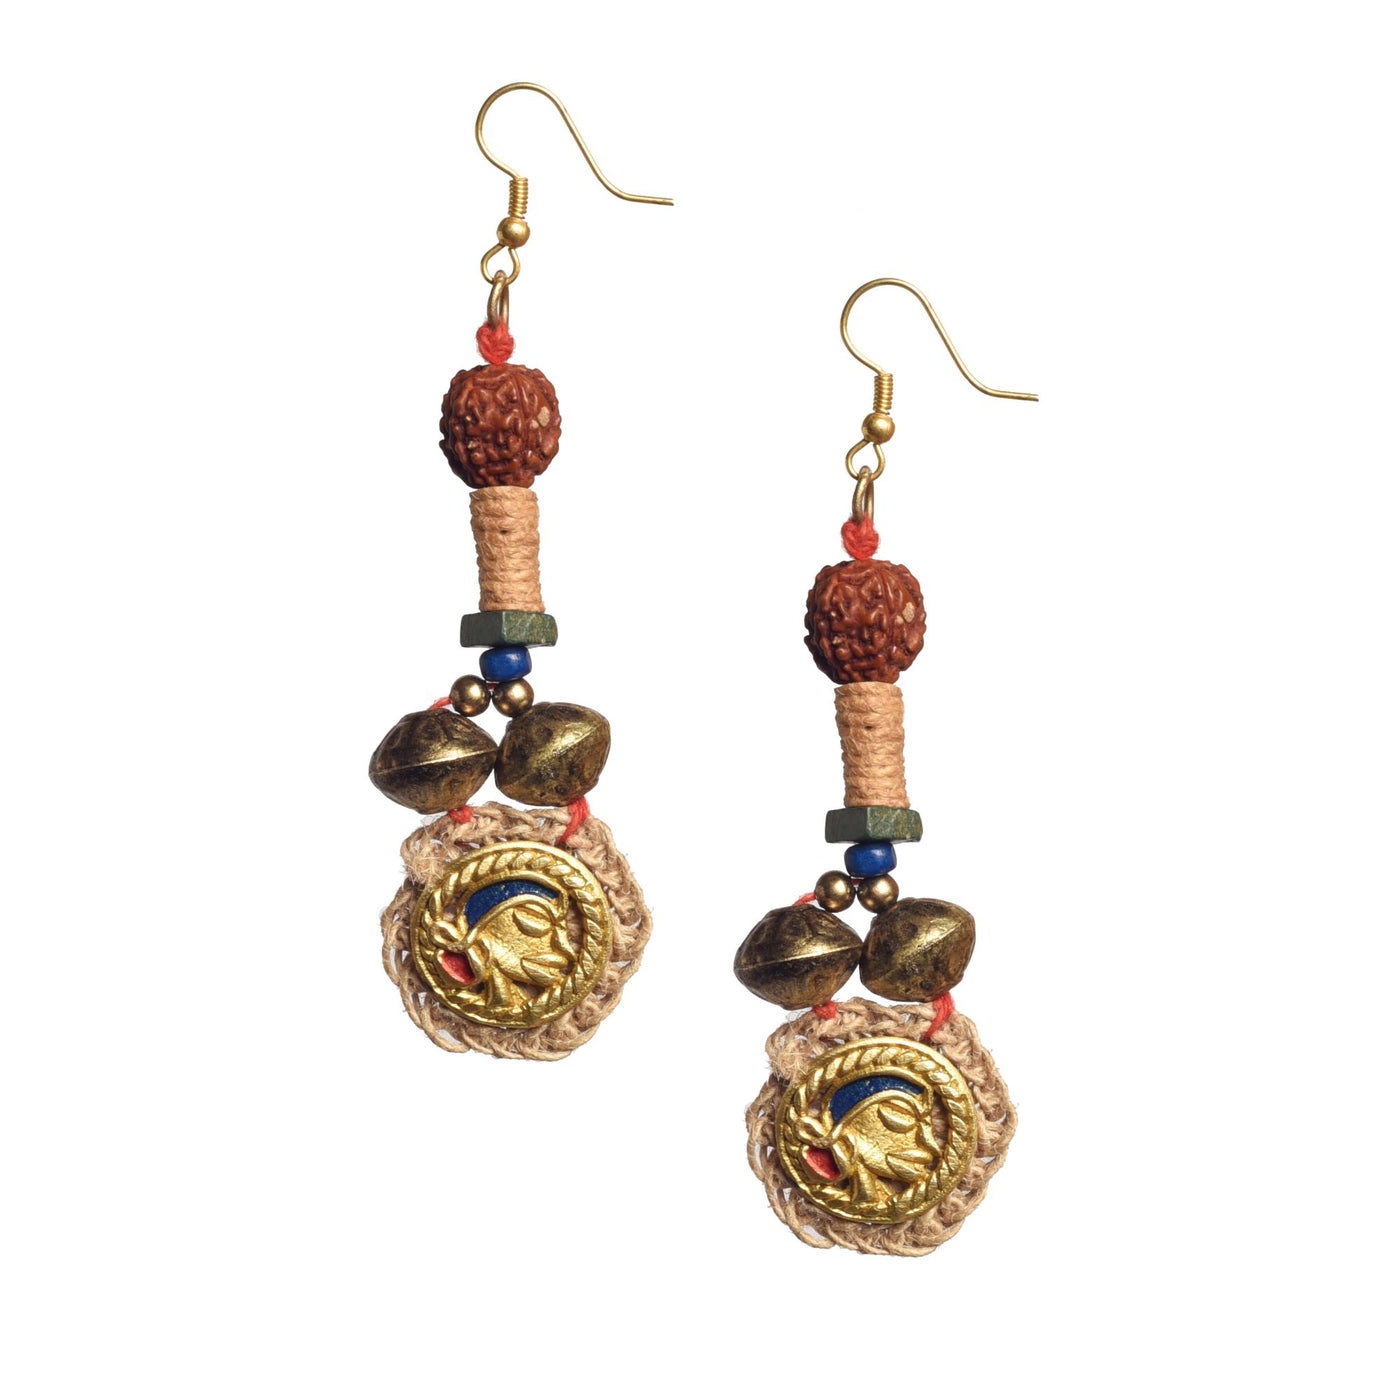 The Noble Handcrafted Tribal Earrings - Fashion & Lifestyle - 3